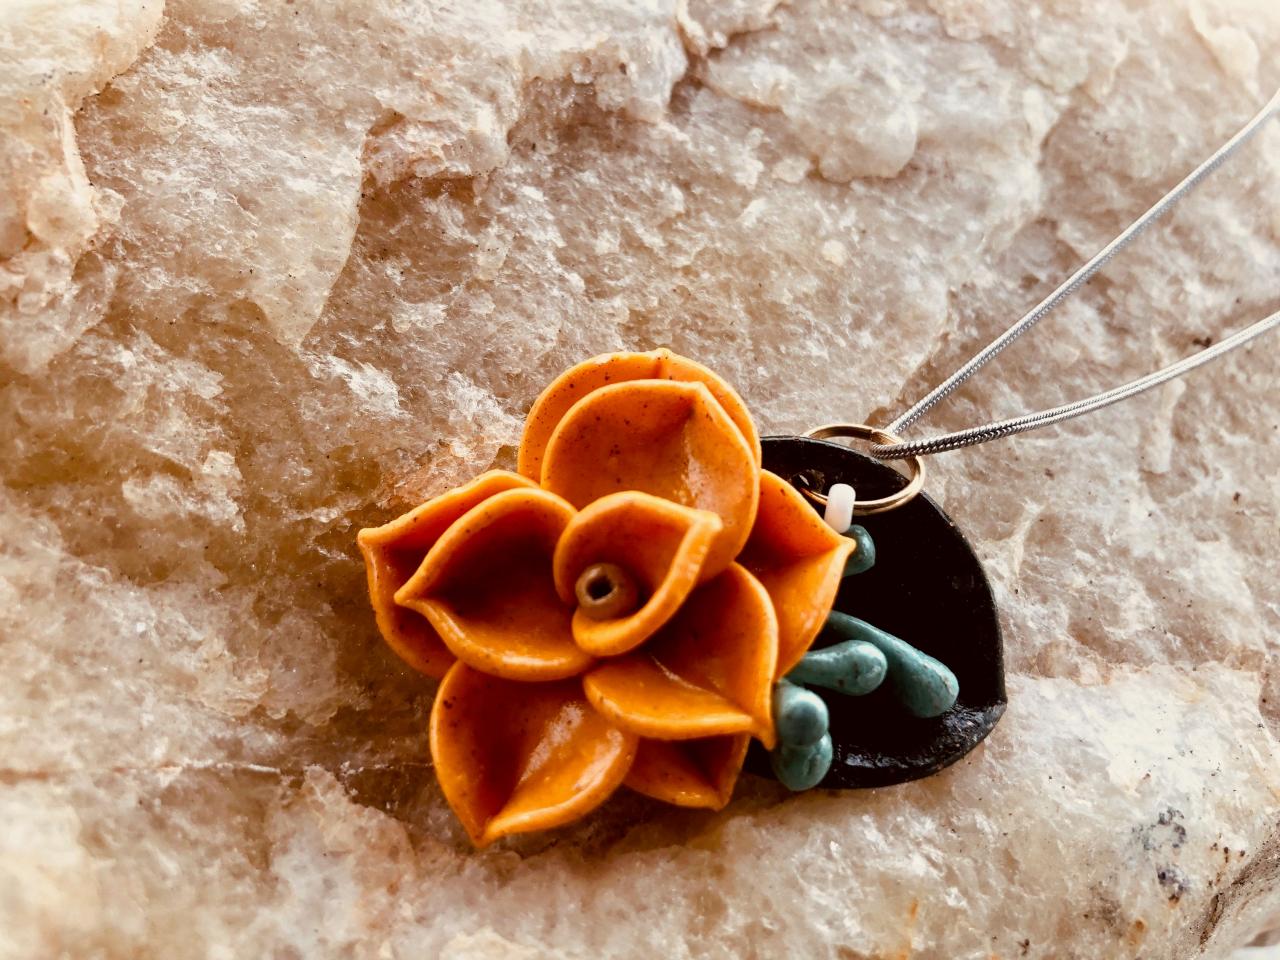 Goldenrod Yellow Rose Clay Pendant Necklace W/silver-blue Seeded Eucalyptus & Forest Green Ruscus Leaf 18" Silver-plated Snake